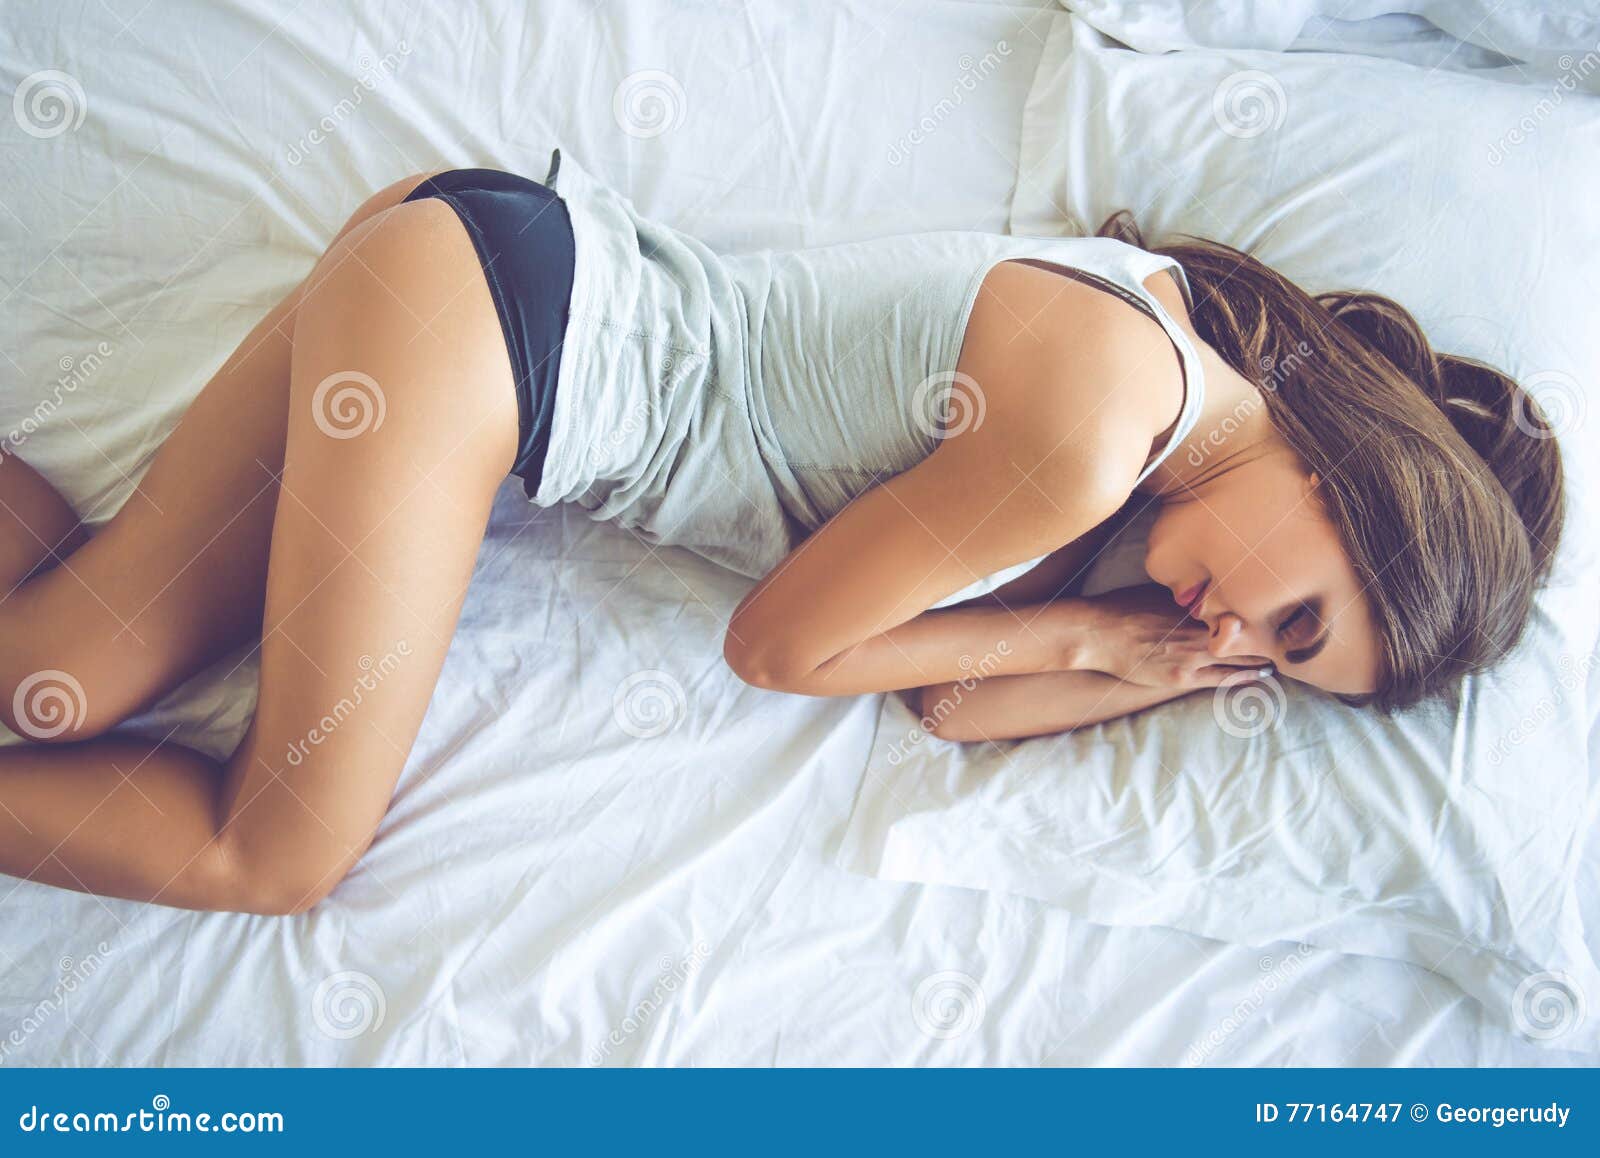 1300px x 958px - Beautiful girl in bed stock image. Image of girl, pajama - 77164747